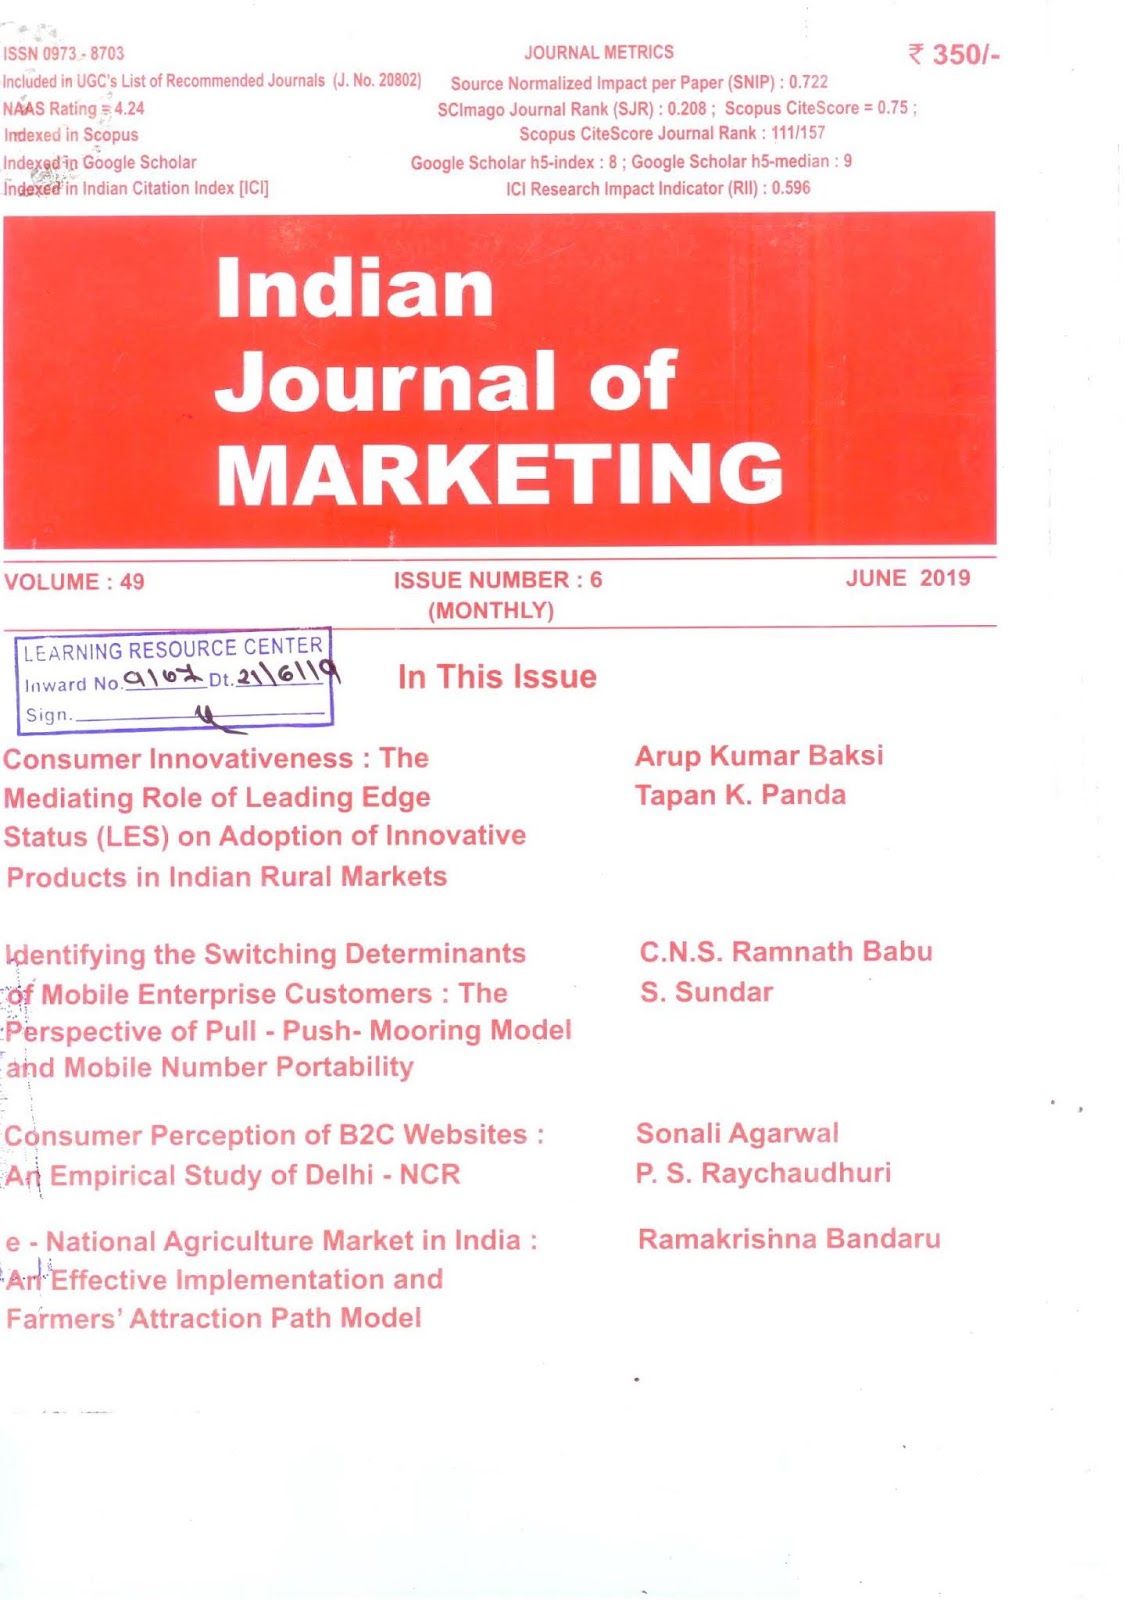 http://indianjournalofmarketing.com/index.php/ijom/issue/view/8511